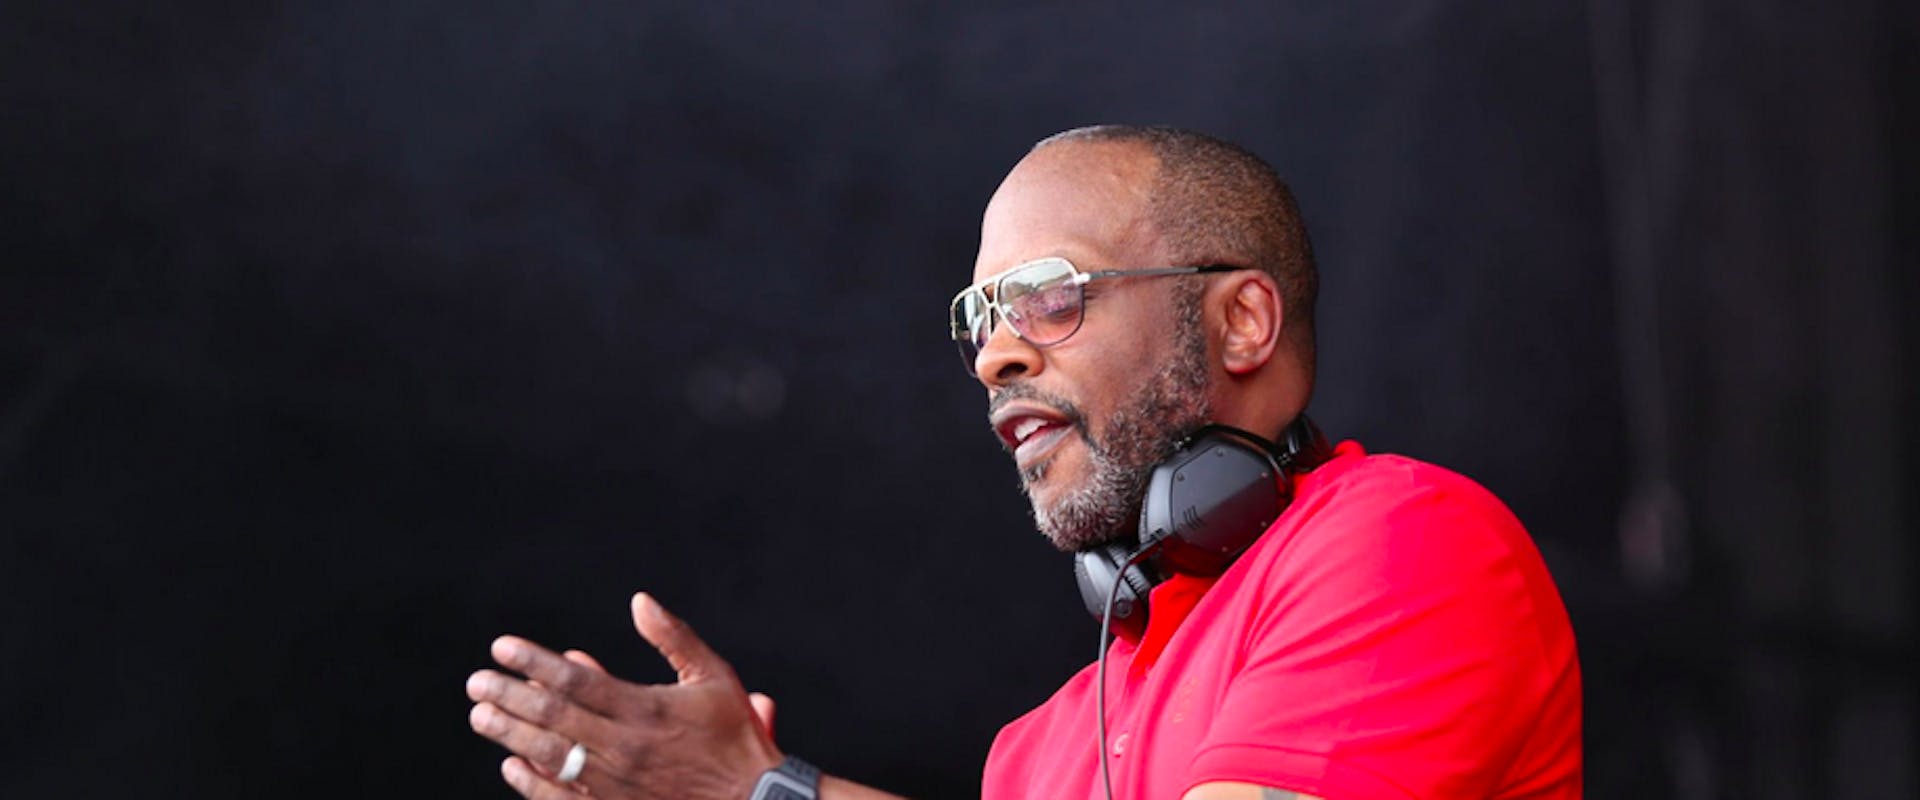 OXON HILL, MD - JUNE 11: DJ Jazzy Jeff spins onstage during Célébrez En Rosé - Washington, D.C. at The Plateau at National Harbor on June 11, 2022 in Oxon Hill, Maryland. 